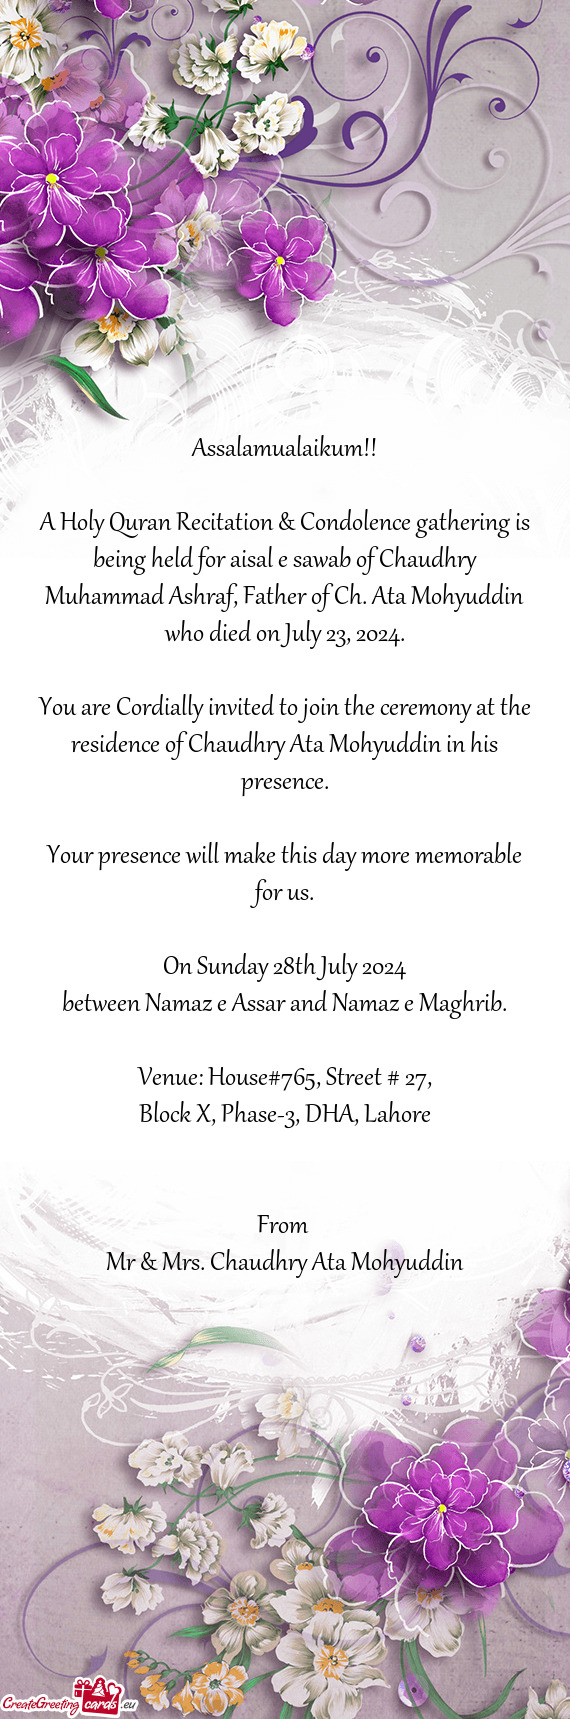 A Holy Quran Recitation & Condolence gathering is being held for aisal e sawab of Chaudhry Muhammad